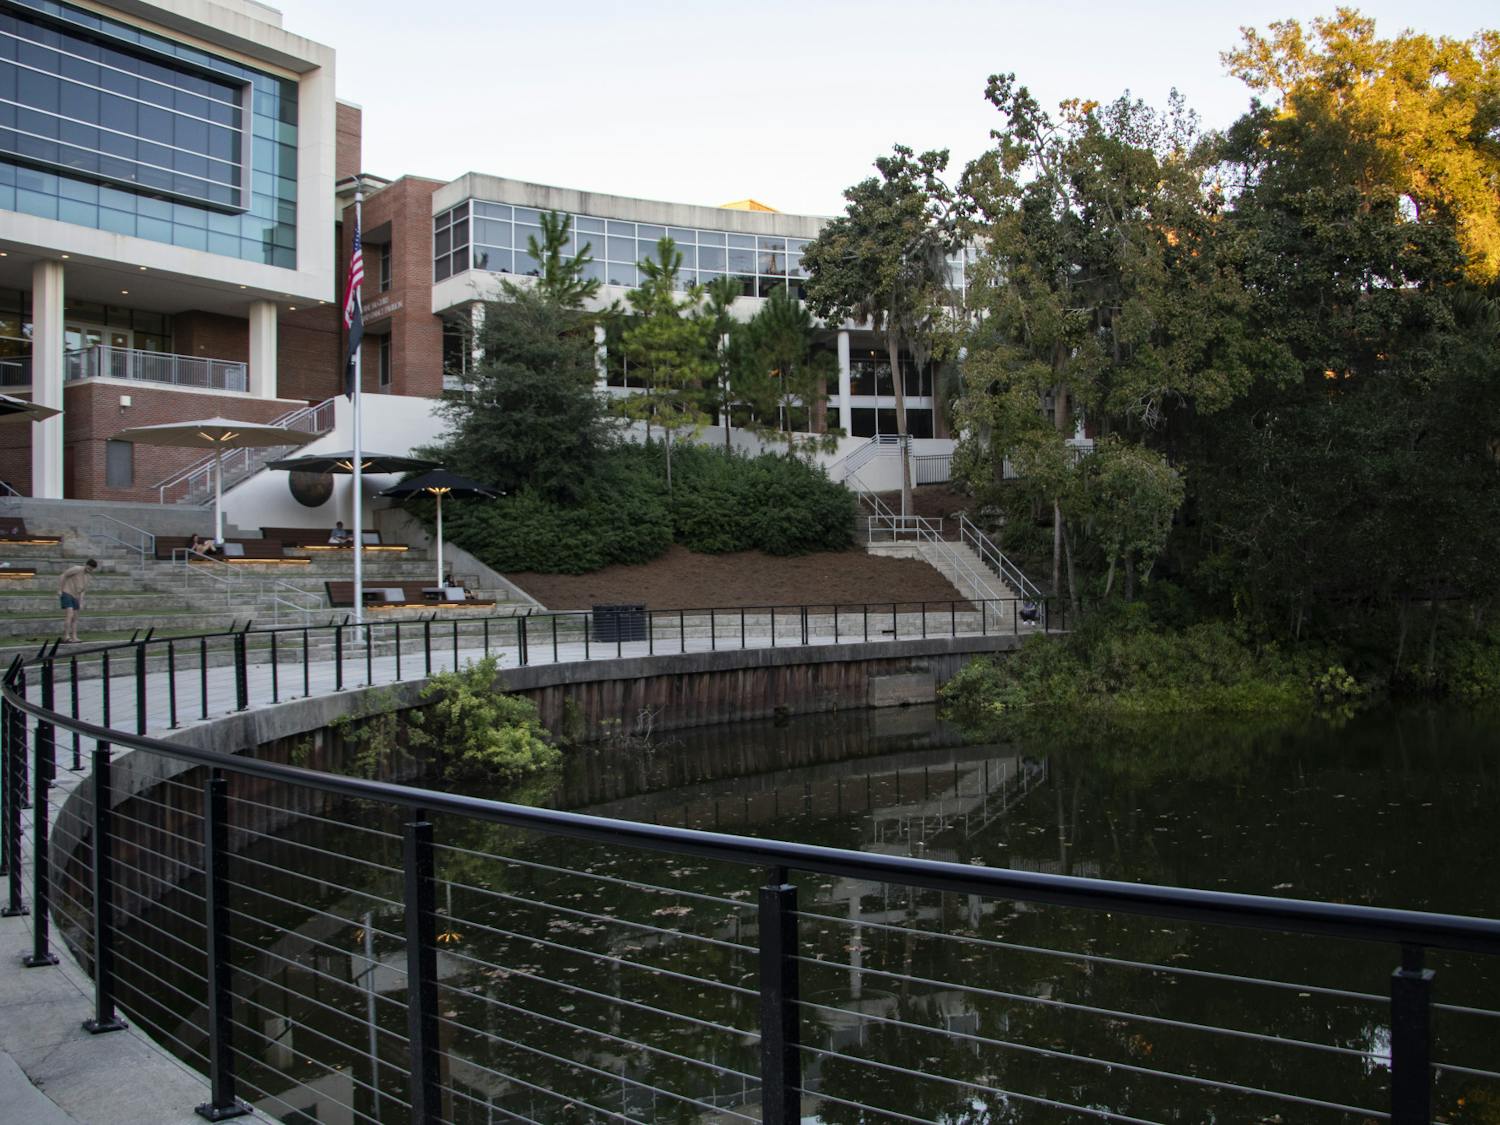 Liberty Pond is seen behind the Reitz Union on Tuesday, Oct. 26, 2021.